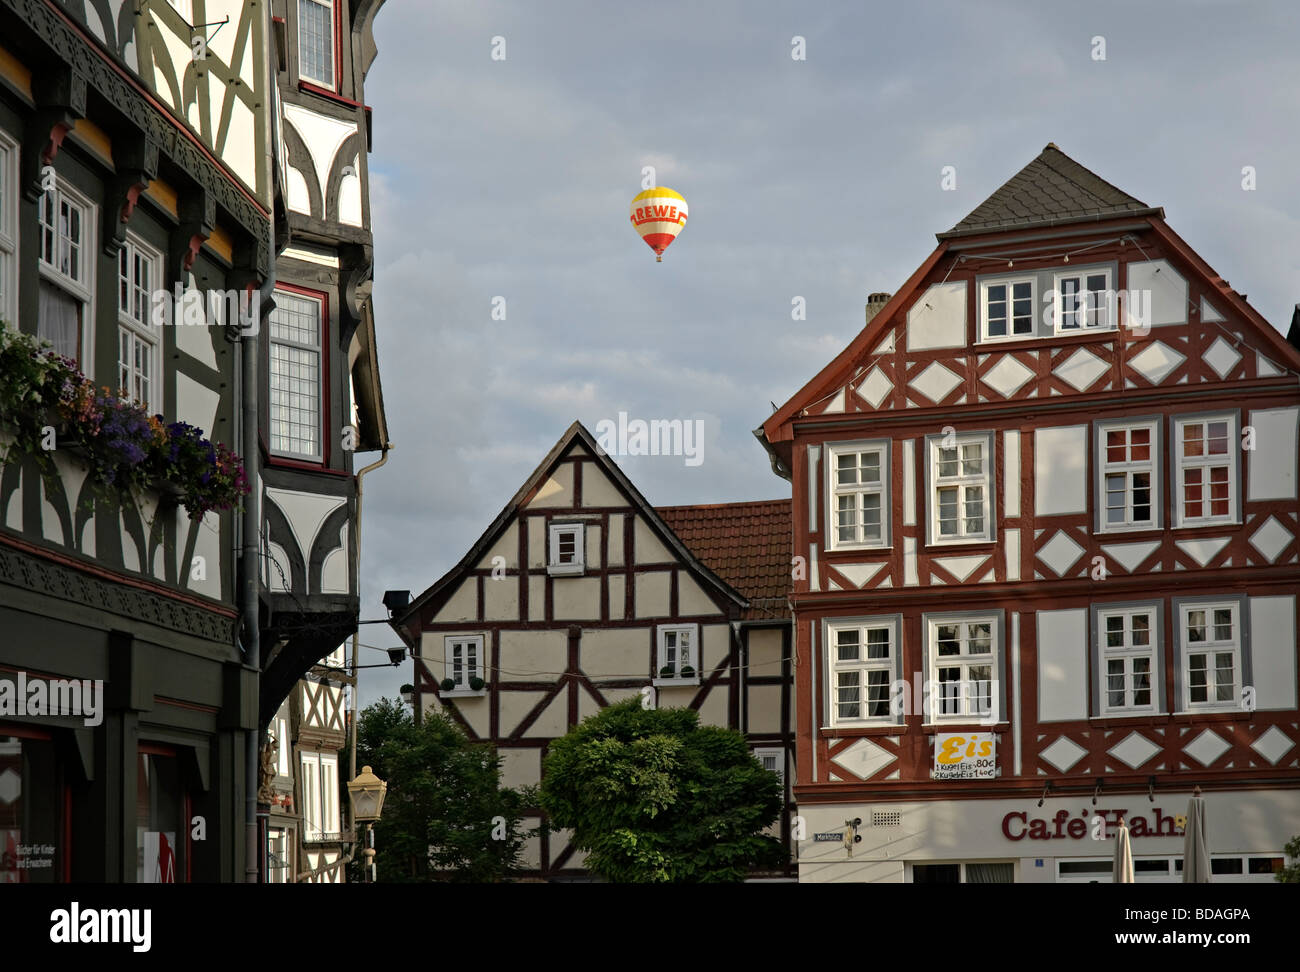 Hot air balloon above medieval town of Fritzlar, Hesse, Germany. Stock Photo